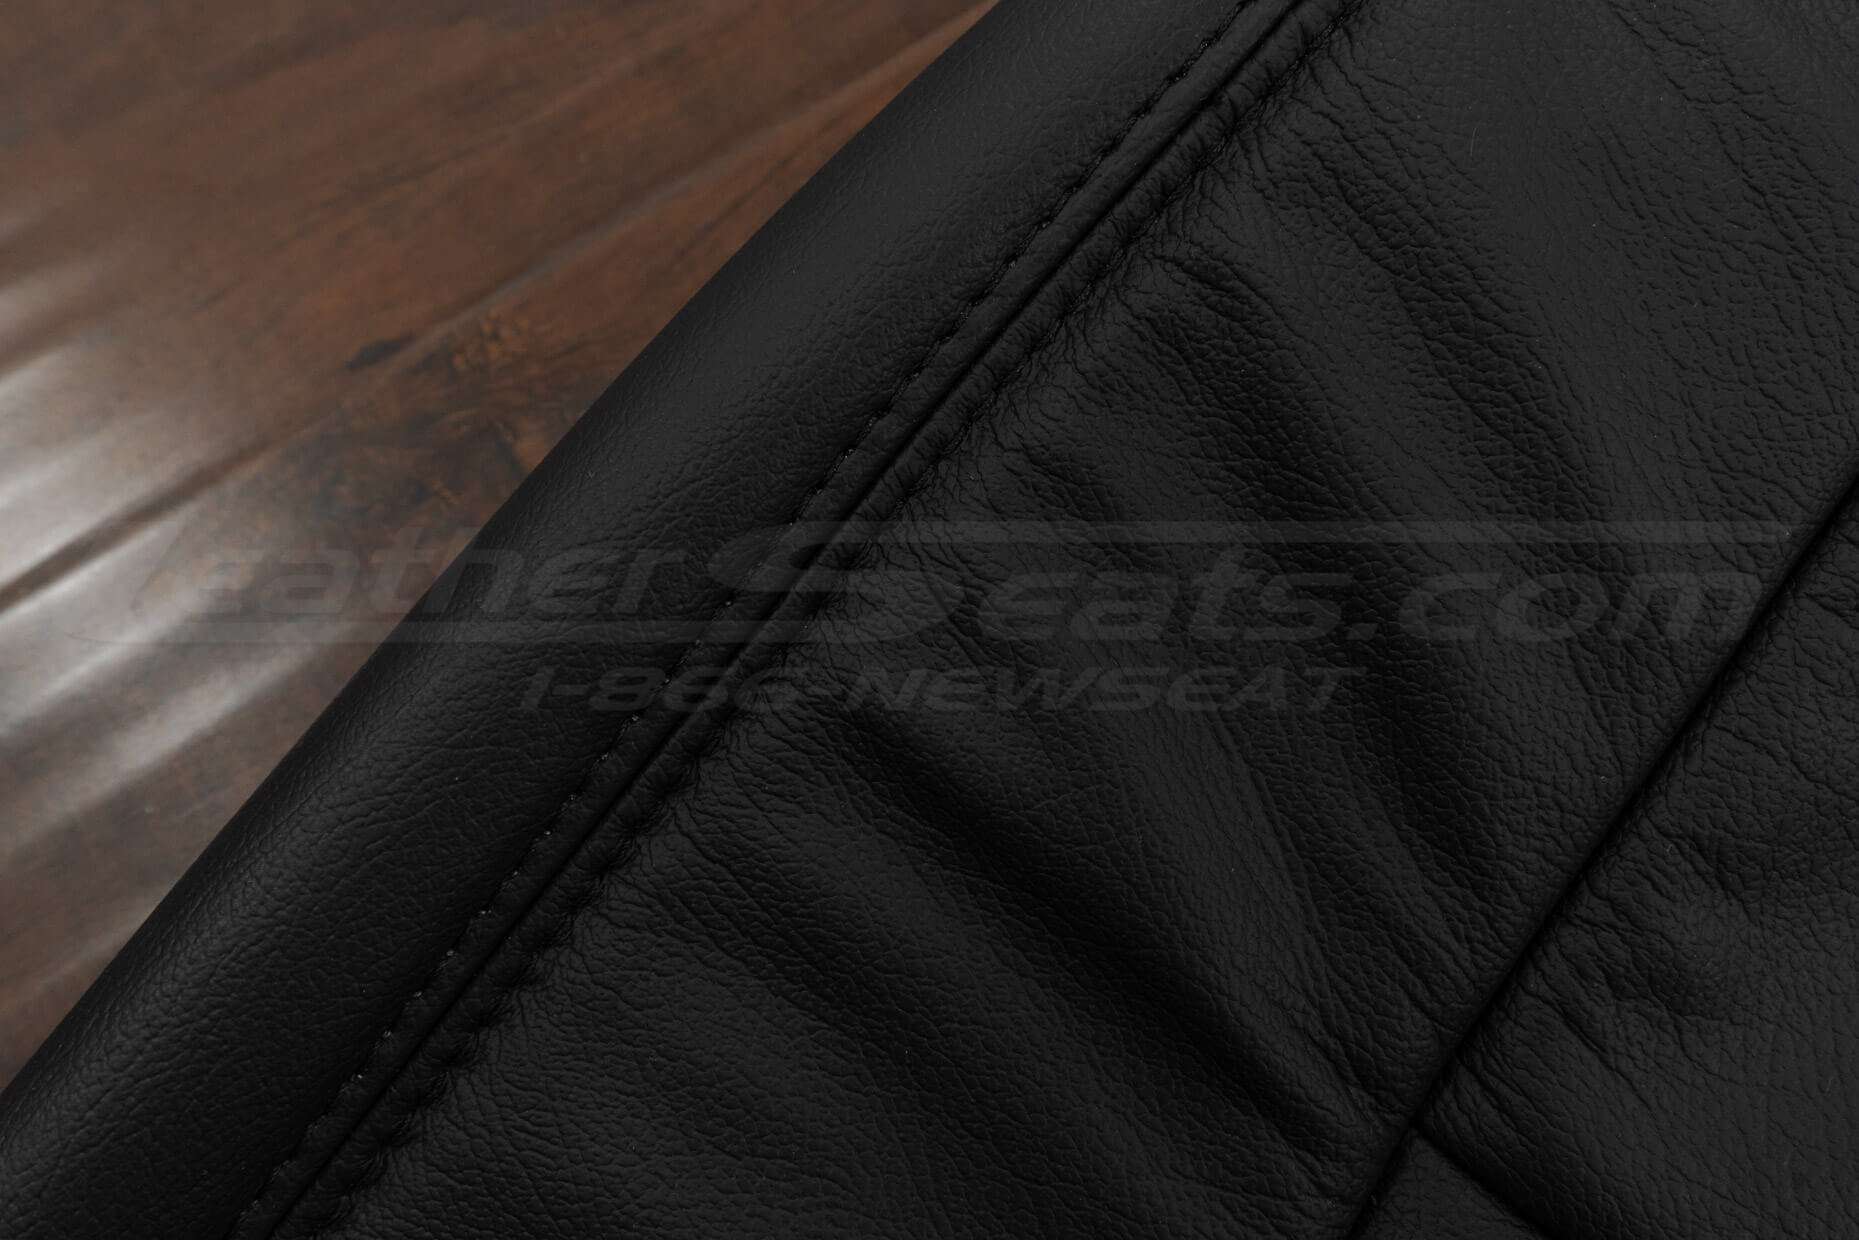 Matching double-stitching in Black on Nissan Xterra upholstery